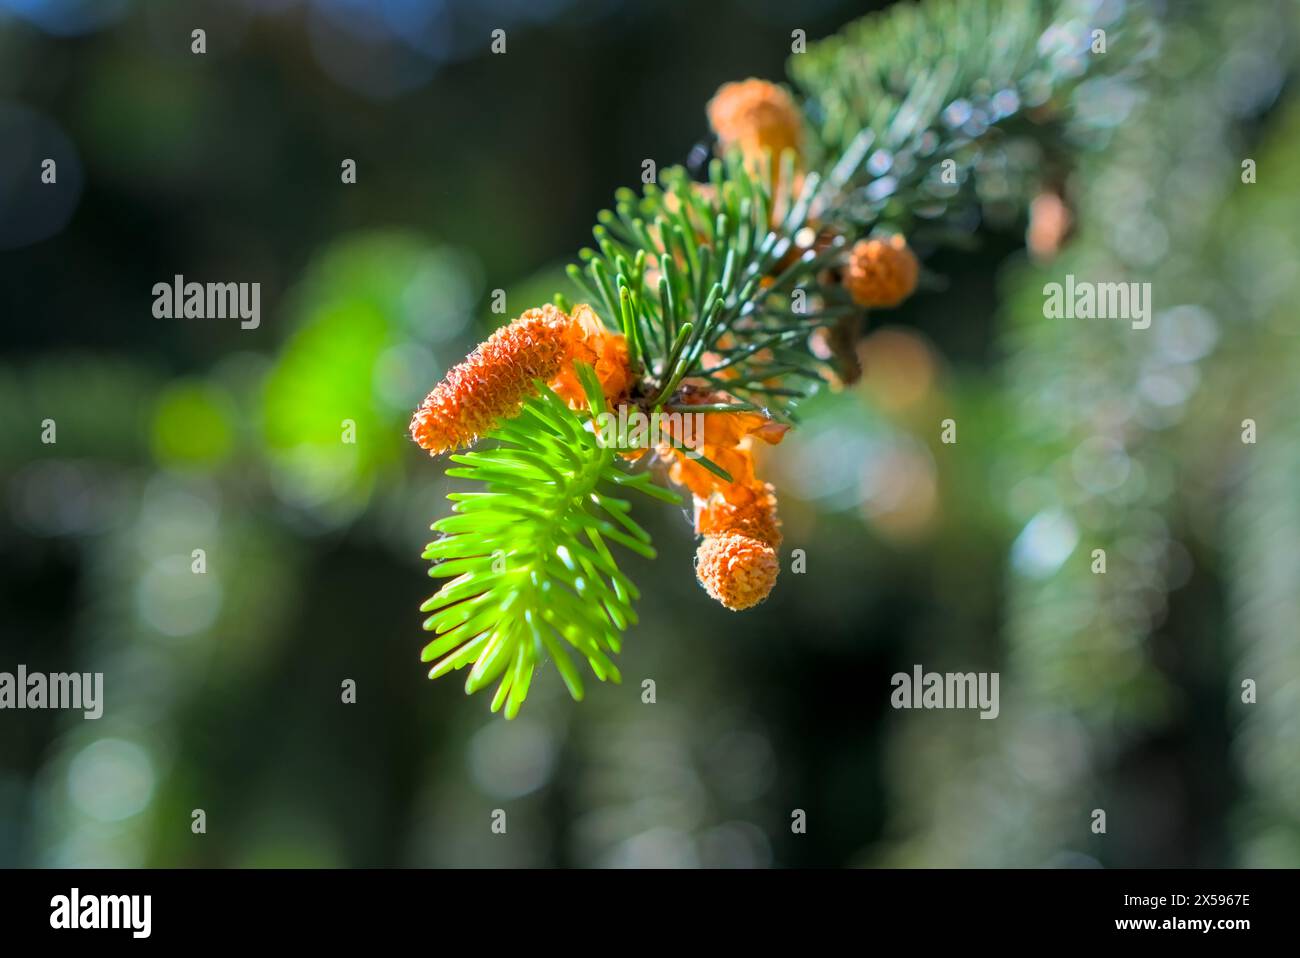 Young pine shoots and small cones horizontal shot, blurred background Stock Photo